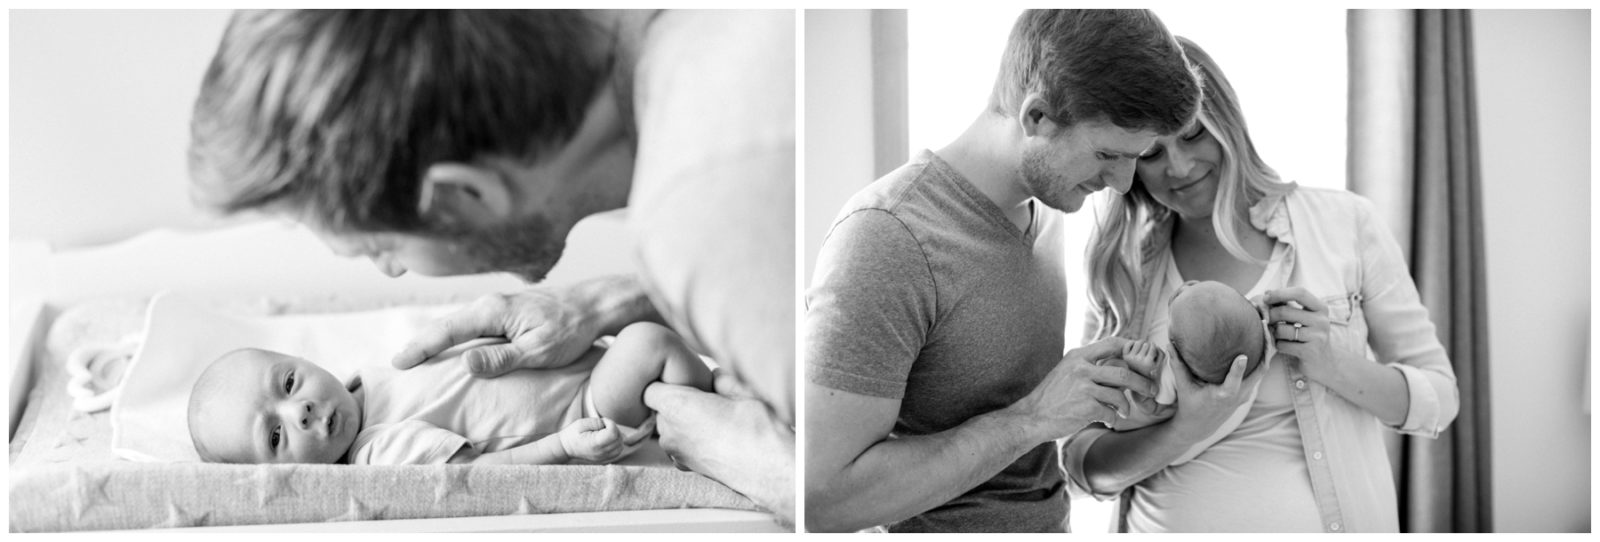 Two pictures. One shows newborn lying down and father touching his belly. The other picture shows the parents holding the newborn baby and looking and him.